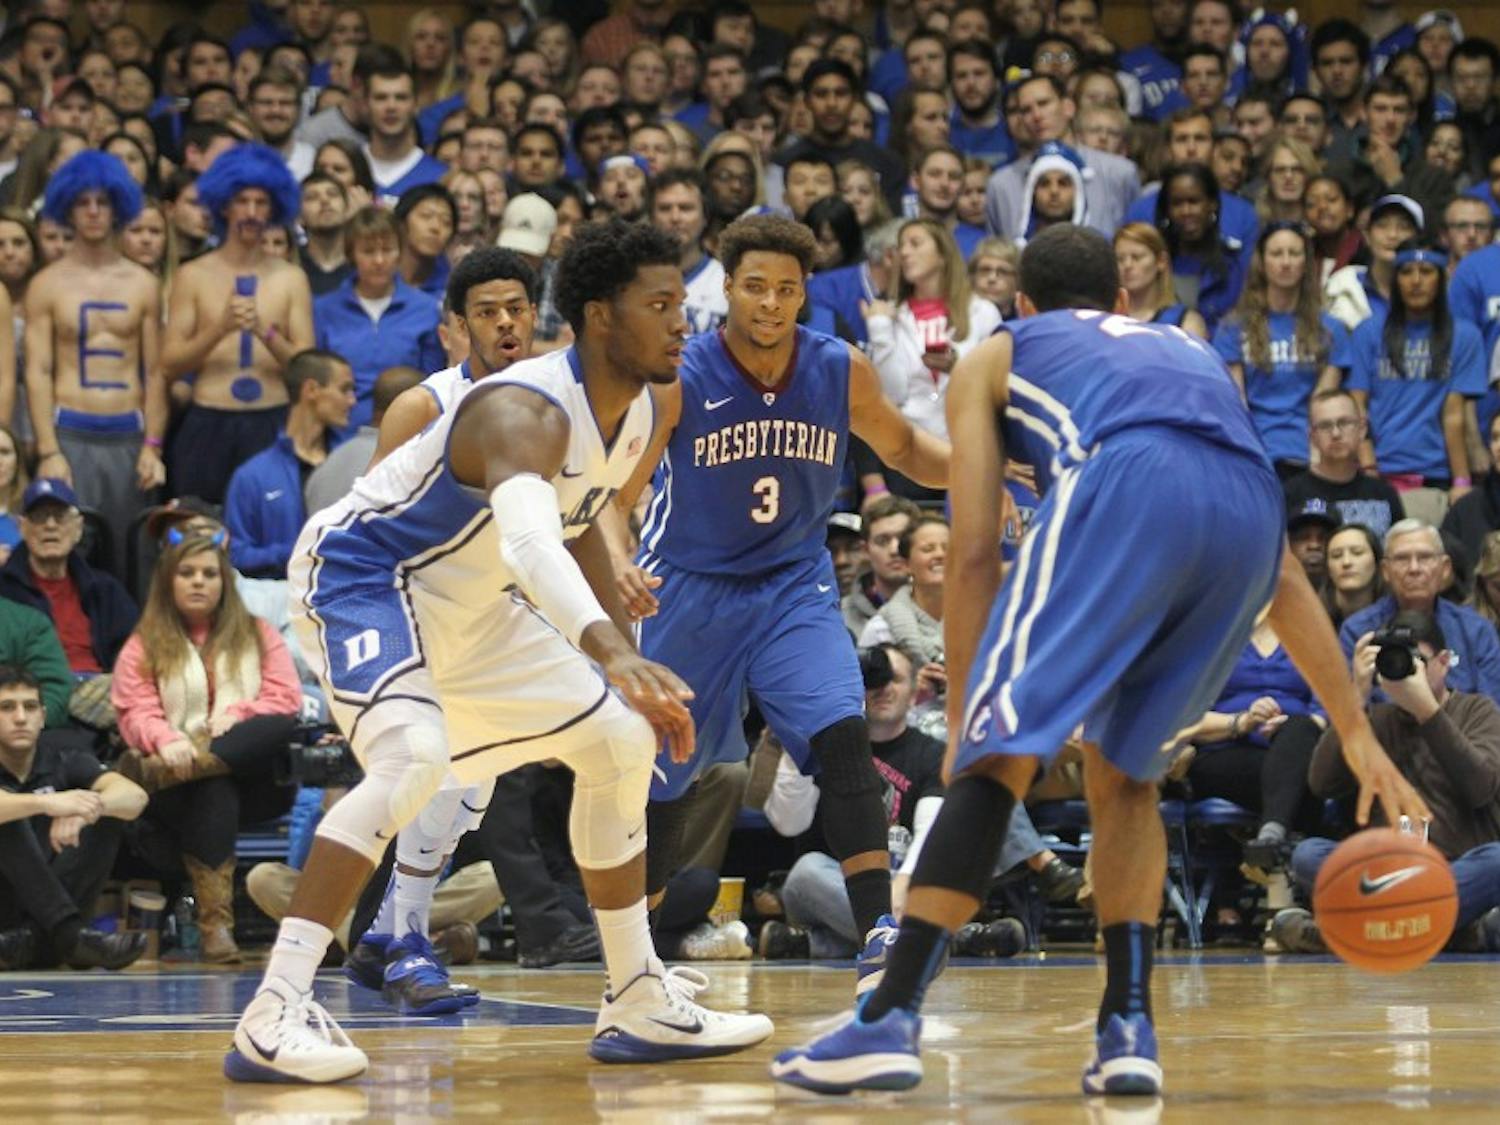 Justise Winslow spearheads Duke's pressure defense with his strength and athleticism.